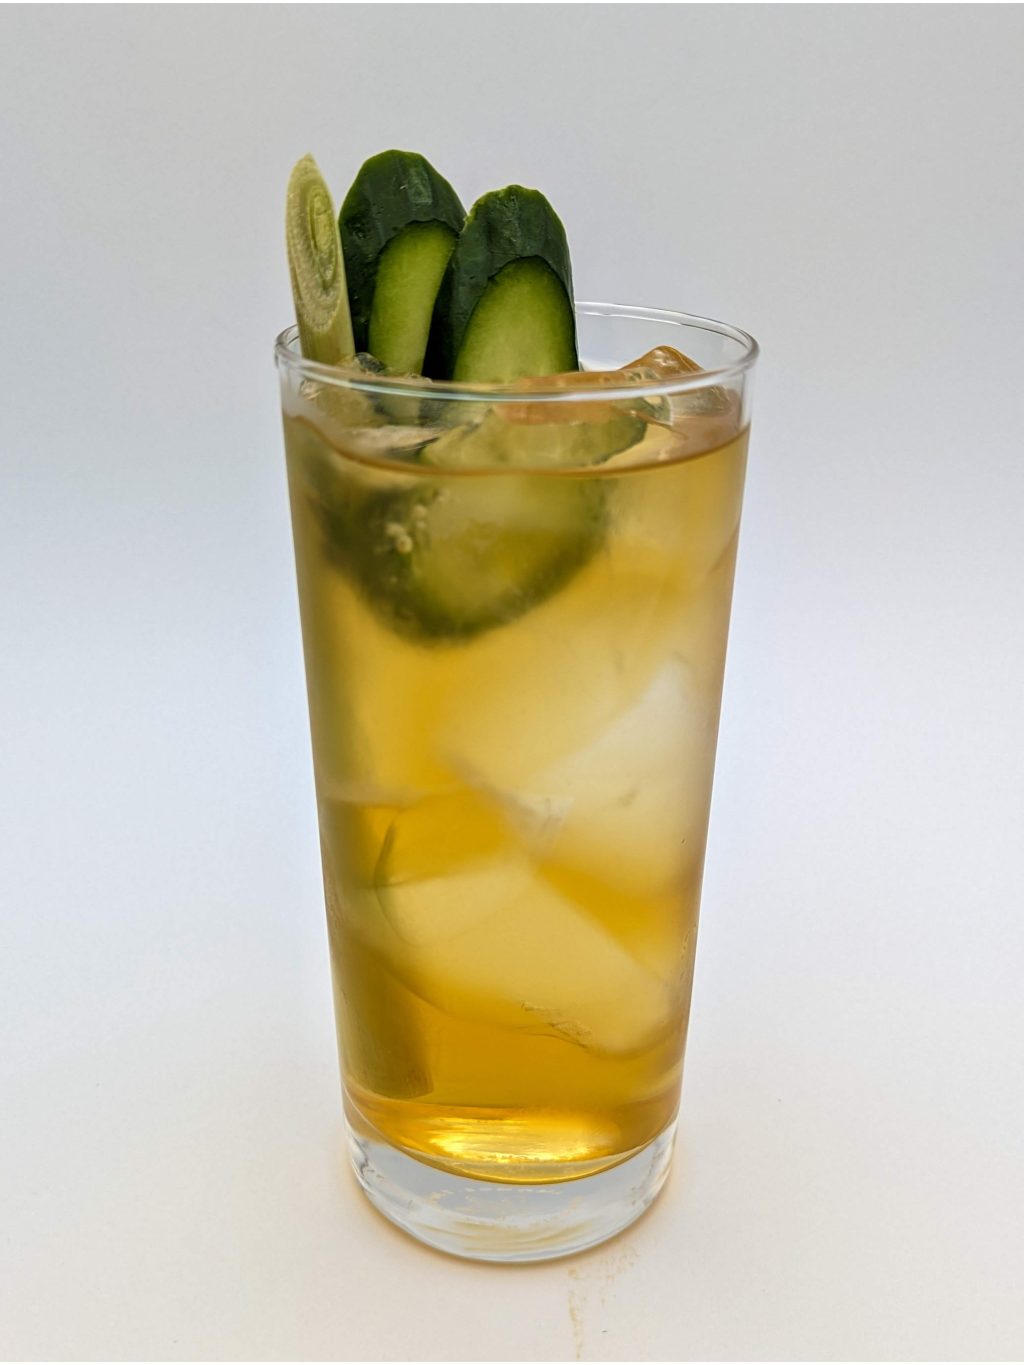 Golden Liquid in a tall glass filled with ice and garnished with a lemongrass stalk and two slices of cucumber